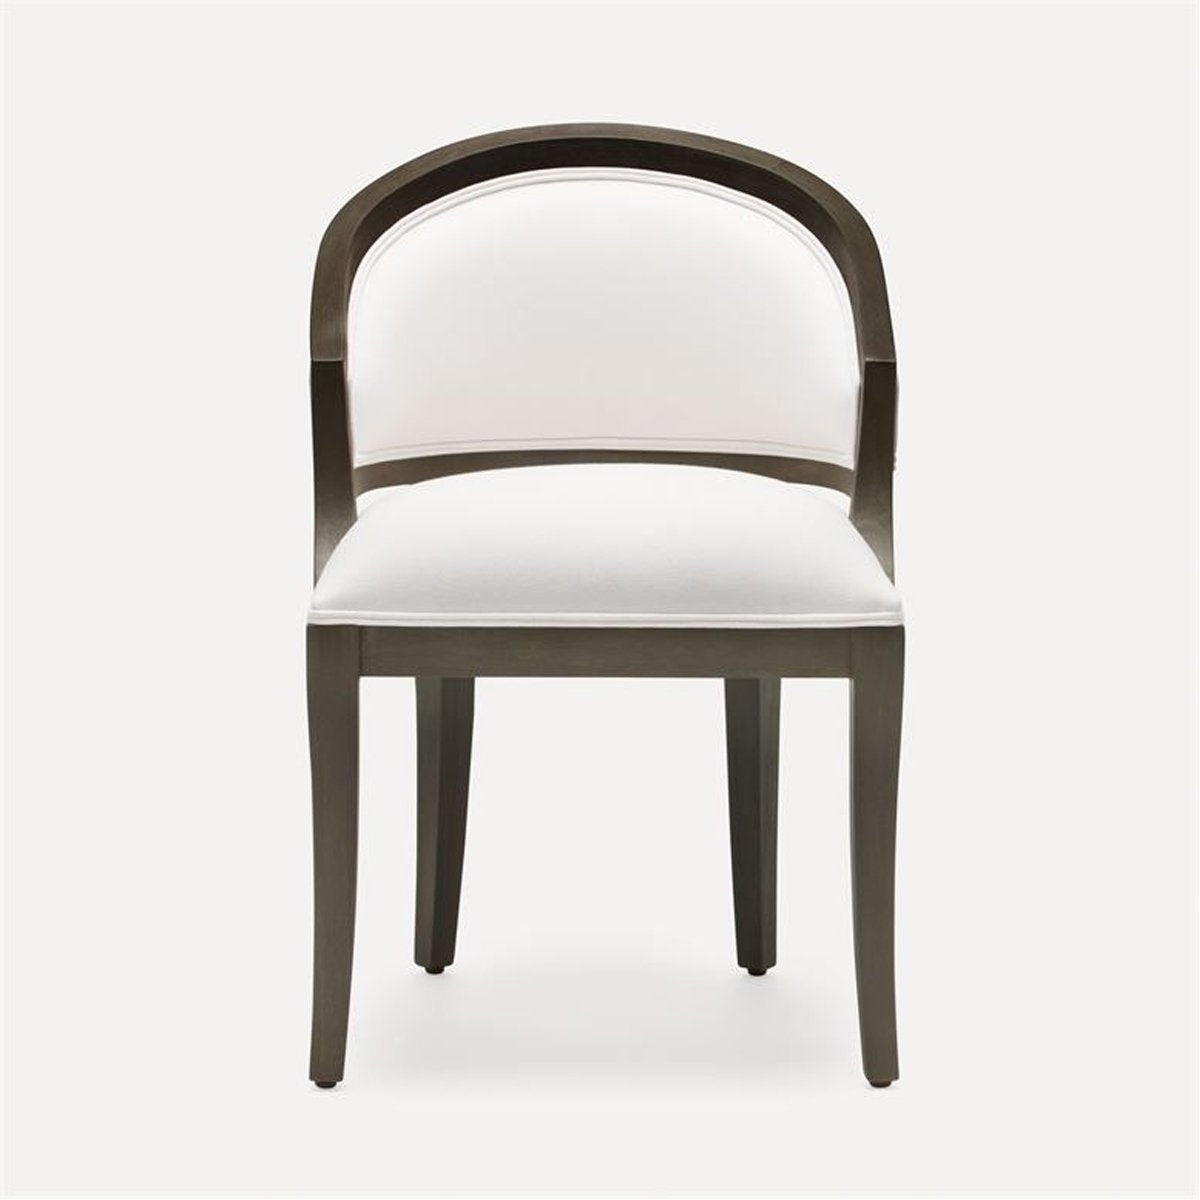 Made Goods Sylvie Curved Back Dining Chair, Severn Canvas